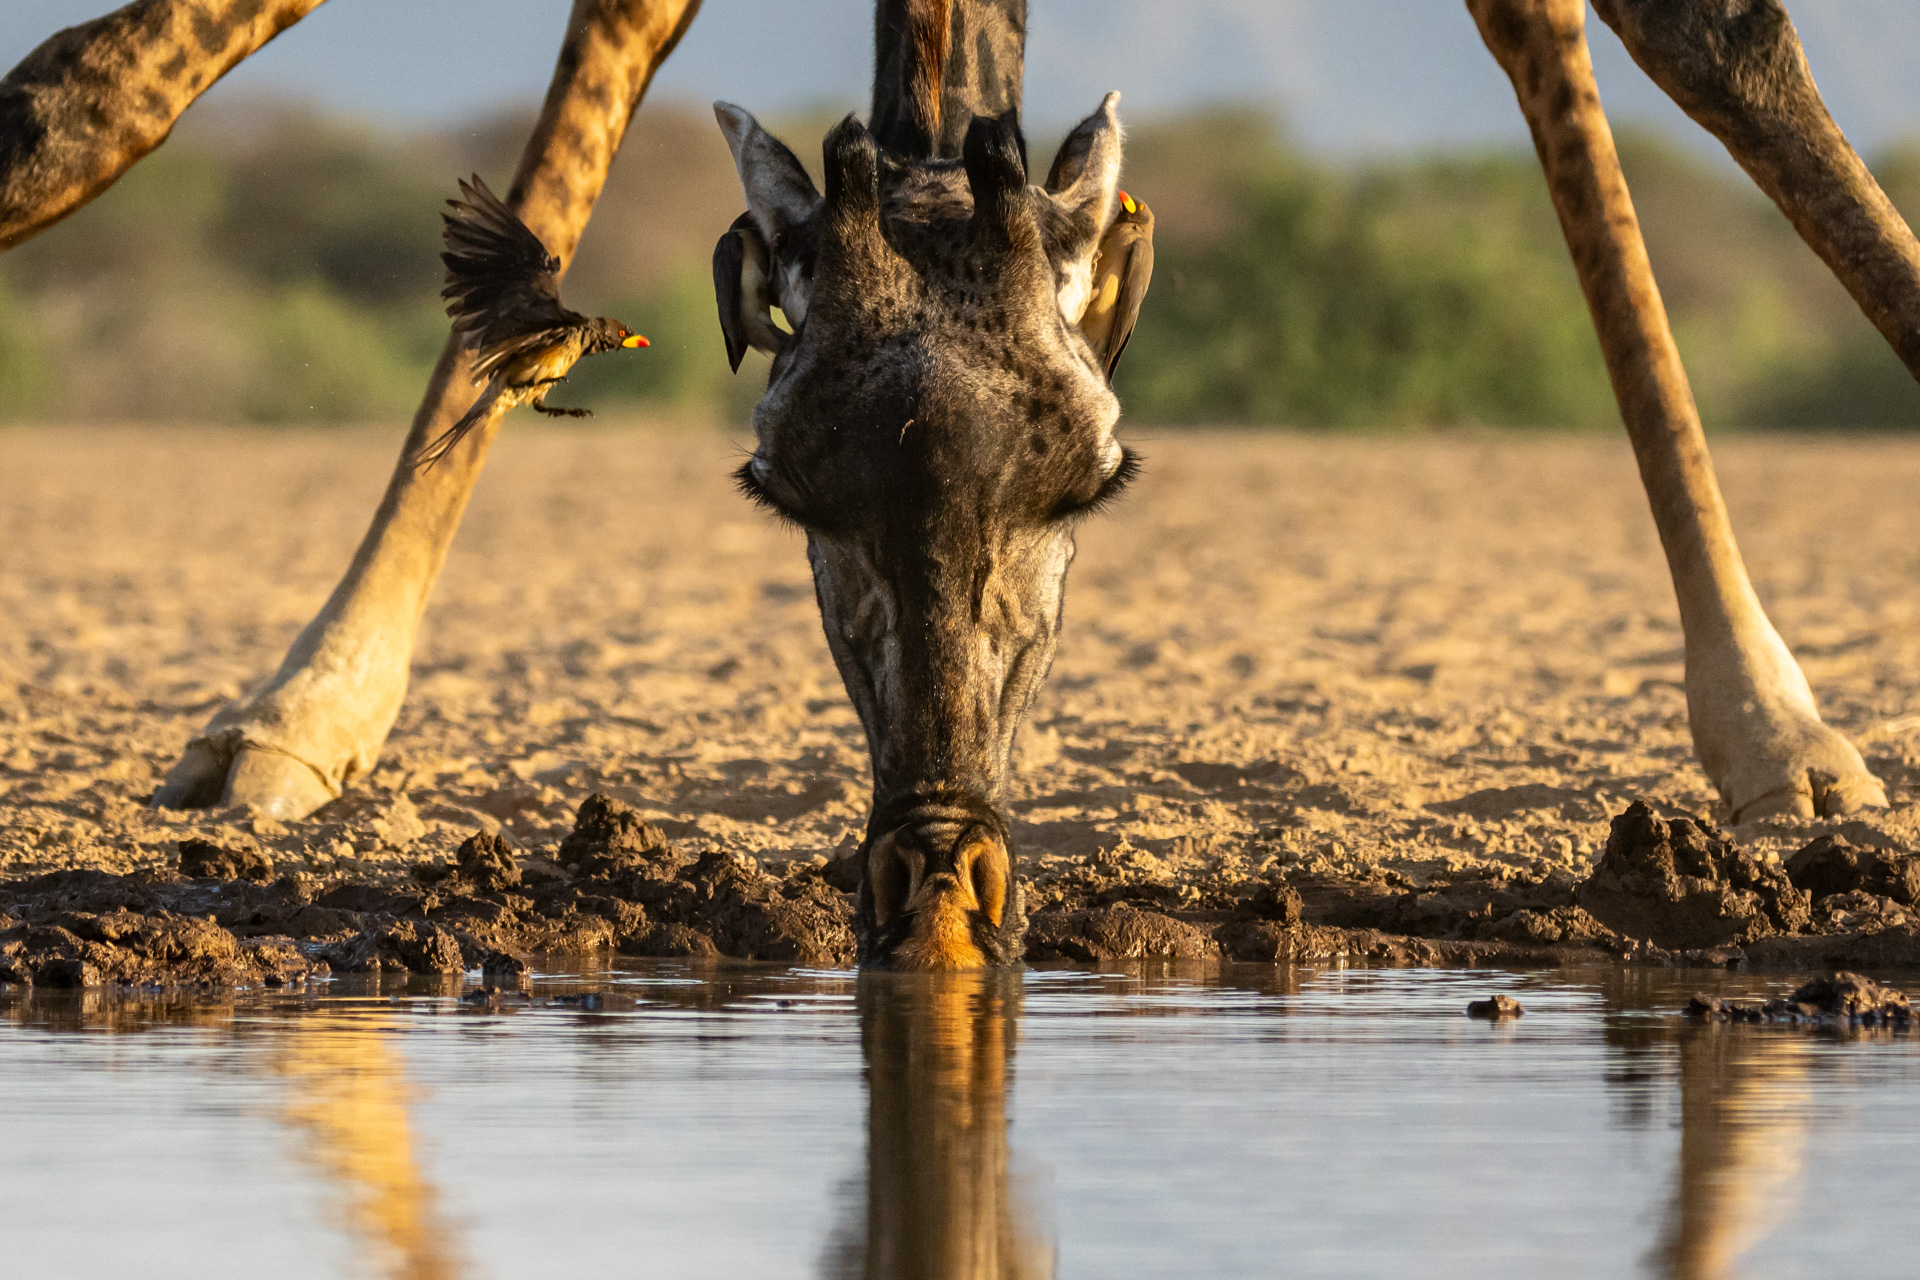 For giraffes, sipping water is a full-body workout